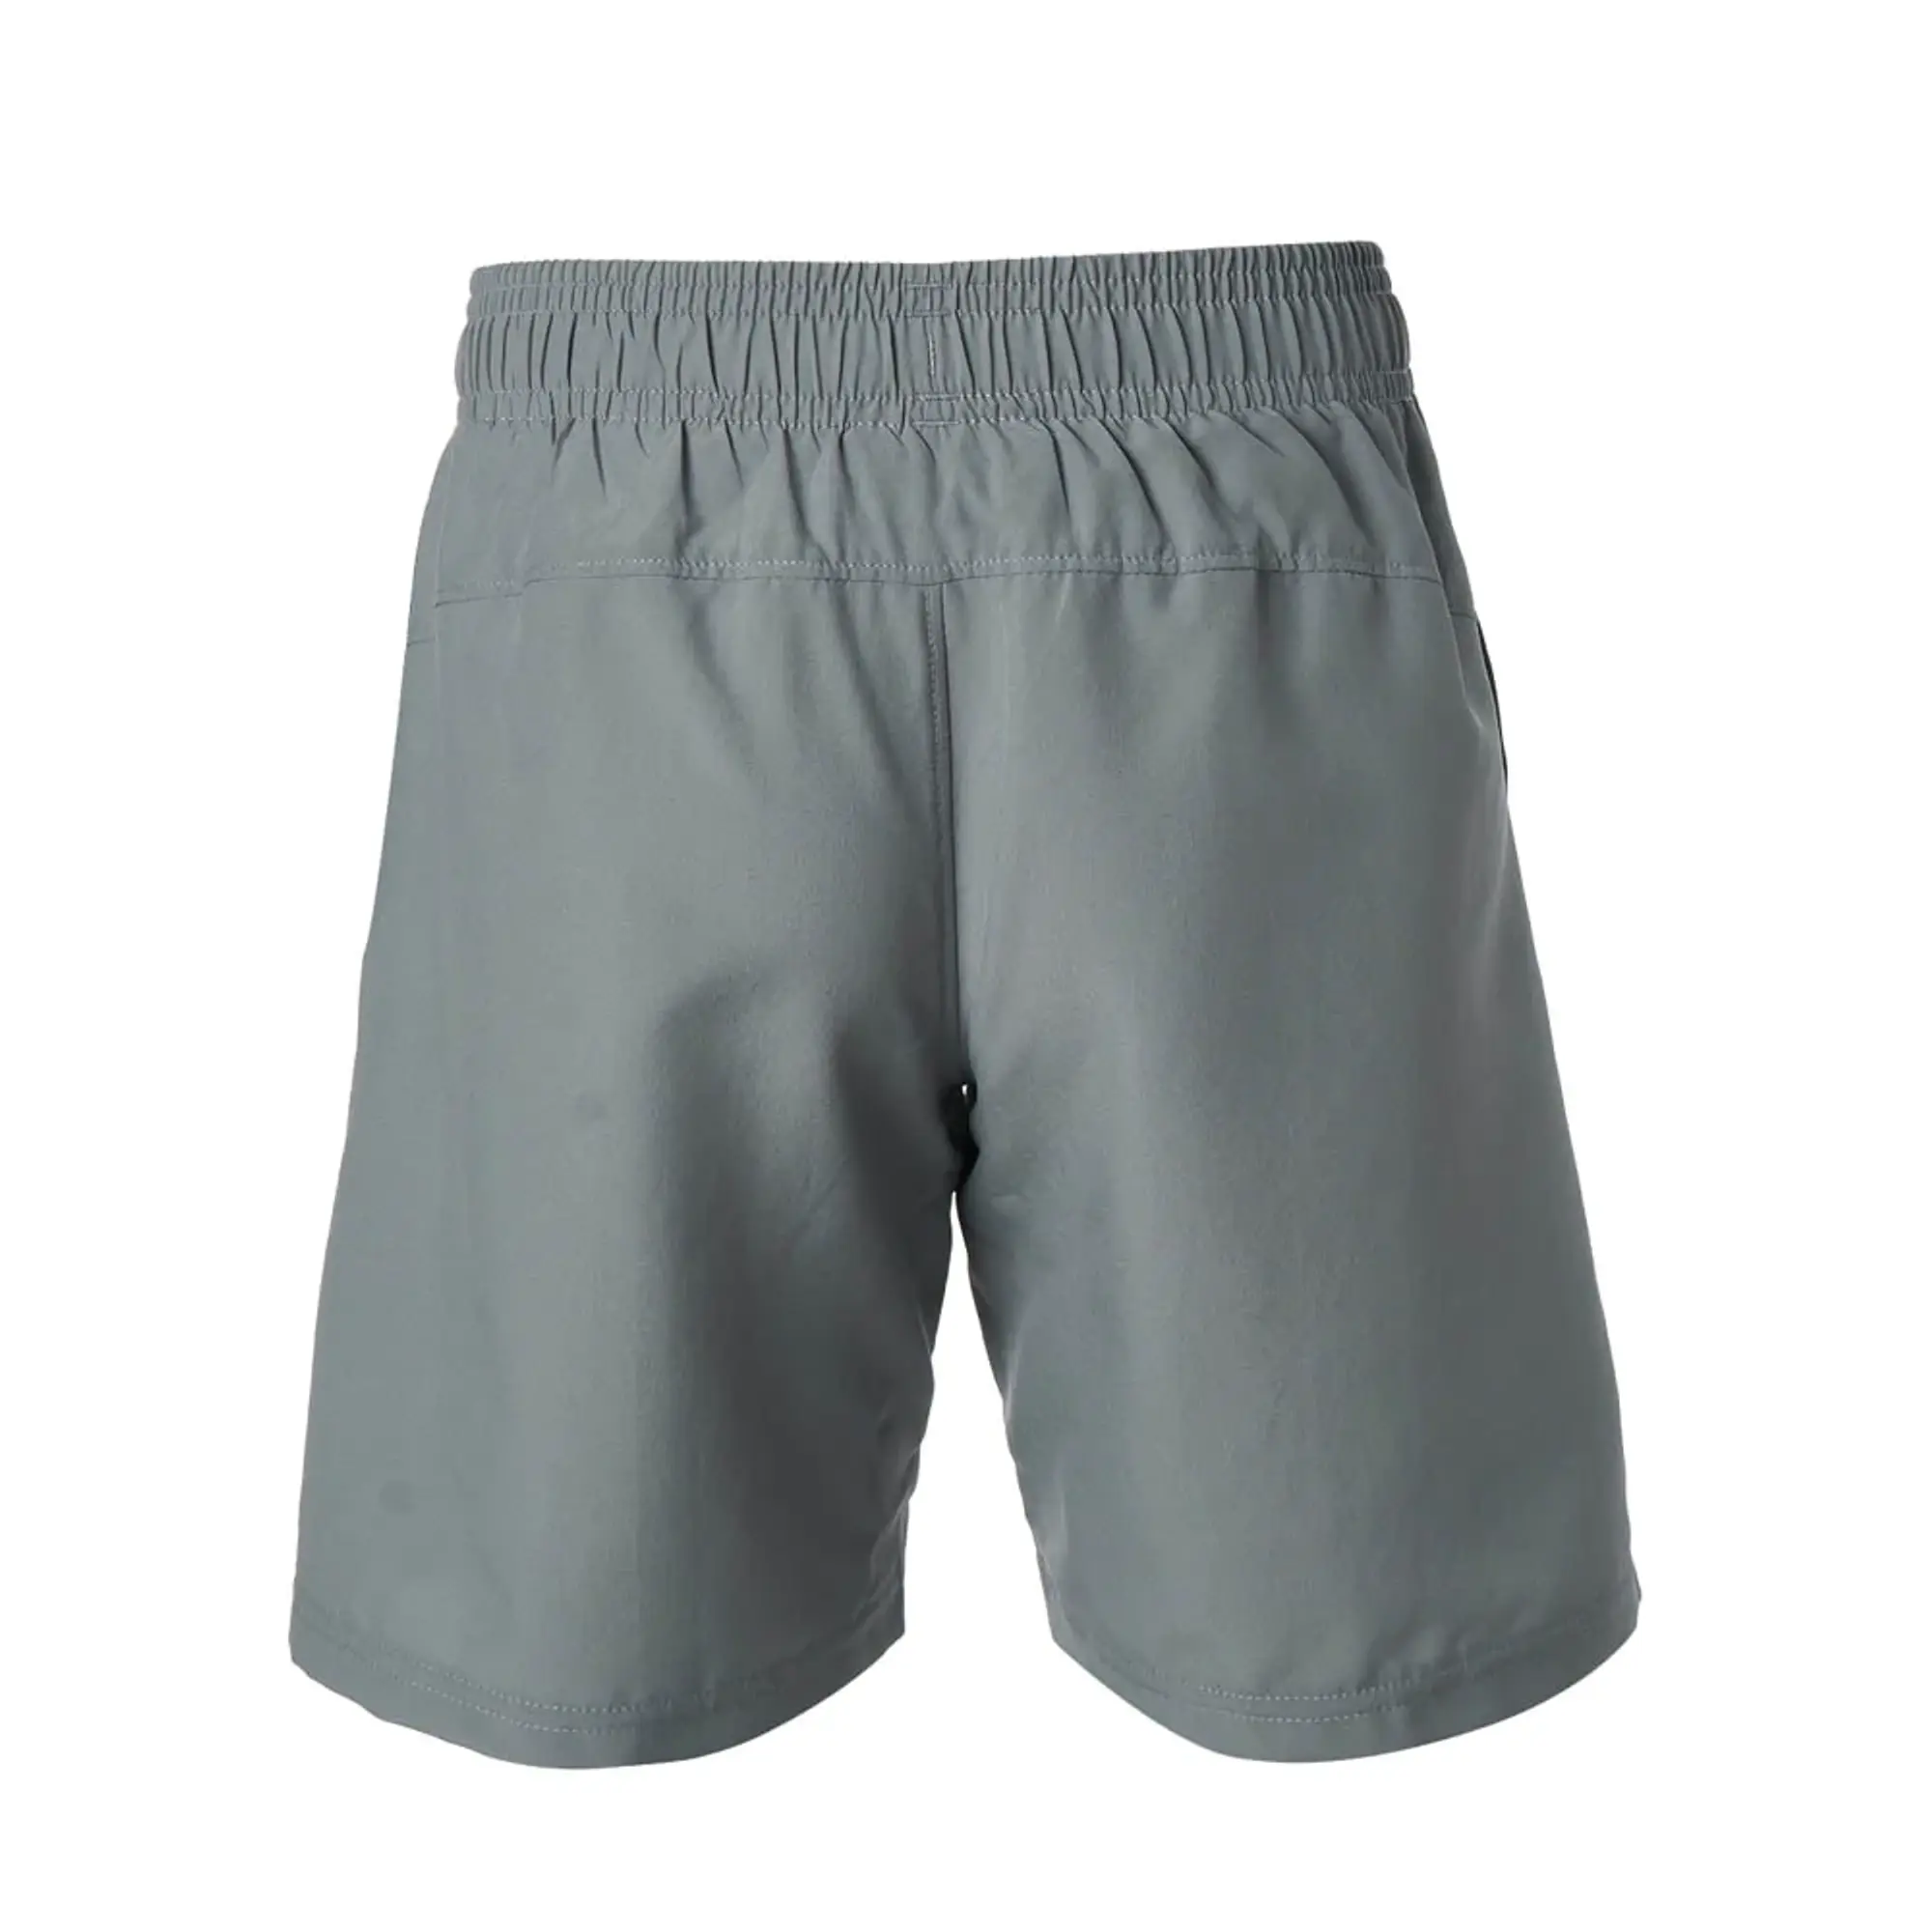 Under Armour Boys Boy's Junior Woven Graphic Shorts in Grey